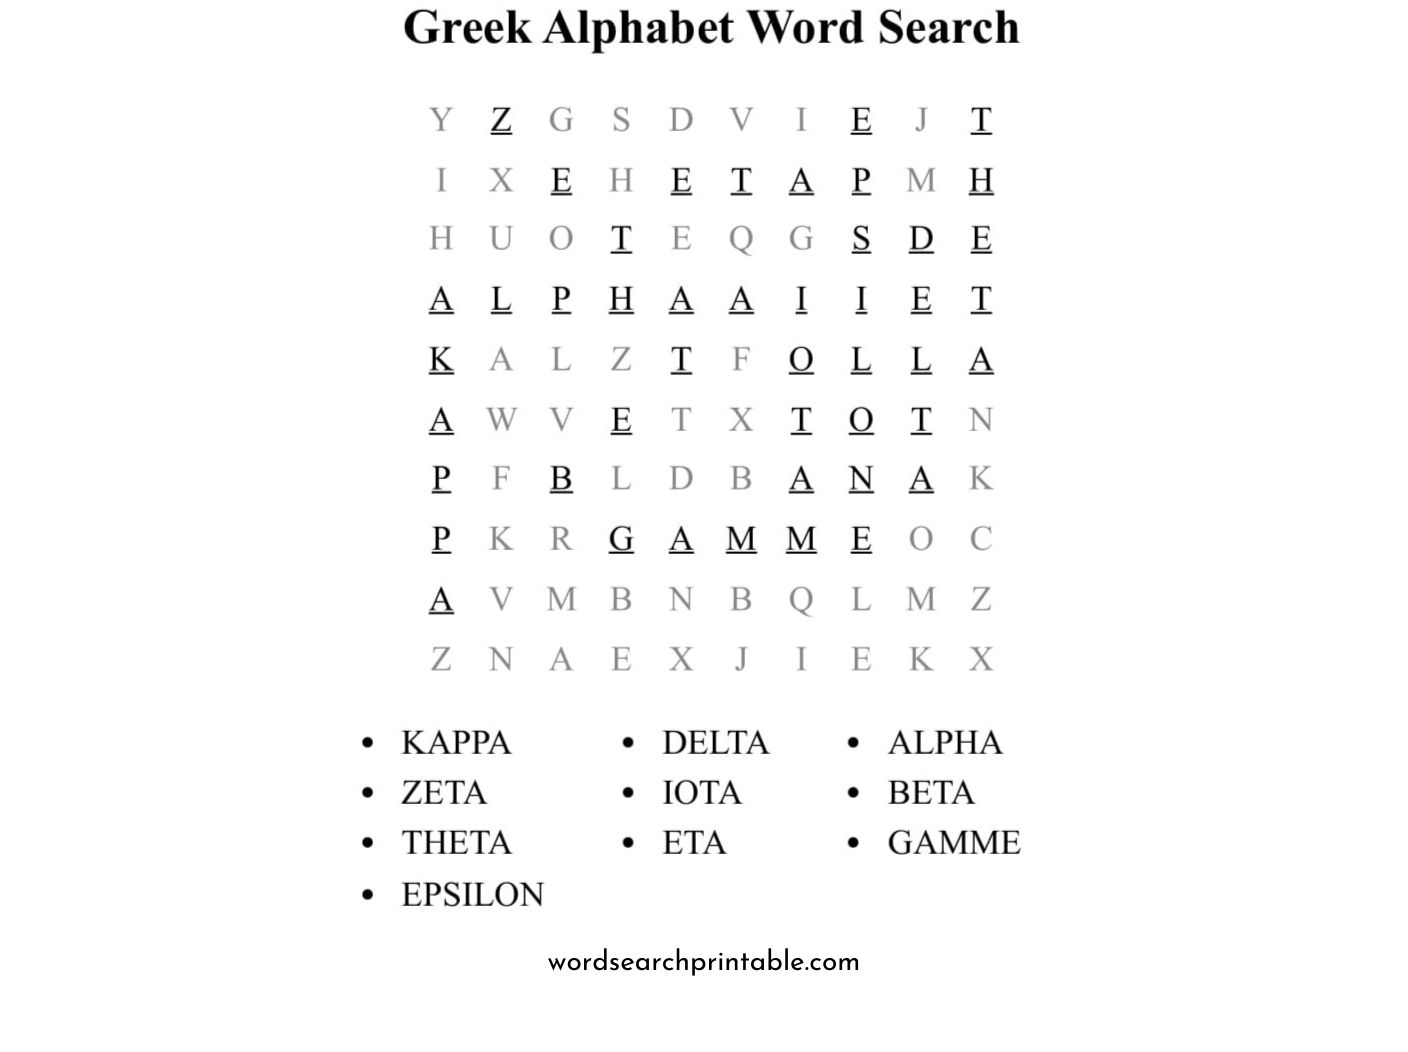 greek alphabet word search puzzle solution